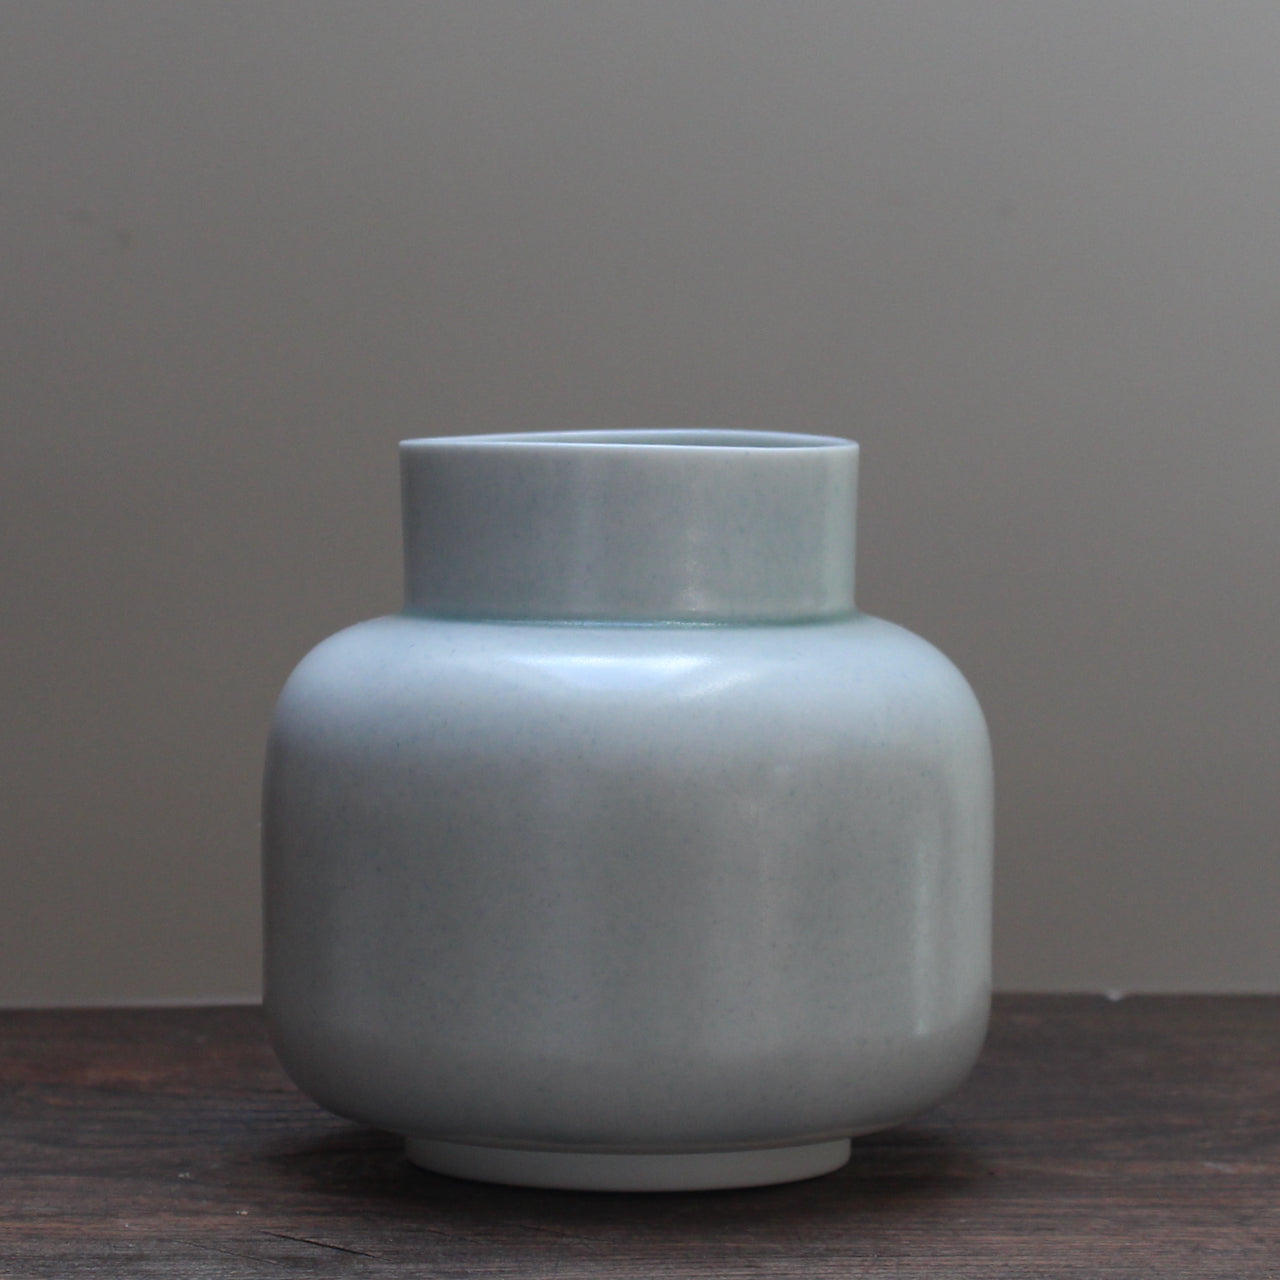 Pale Green ceramic vase by ceramicist Laura Plant on a wooden table